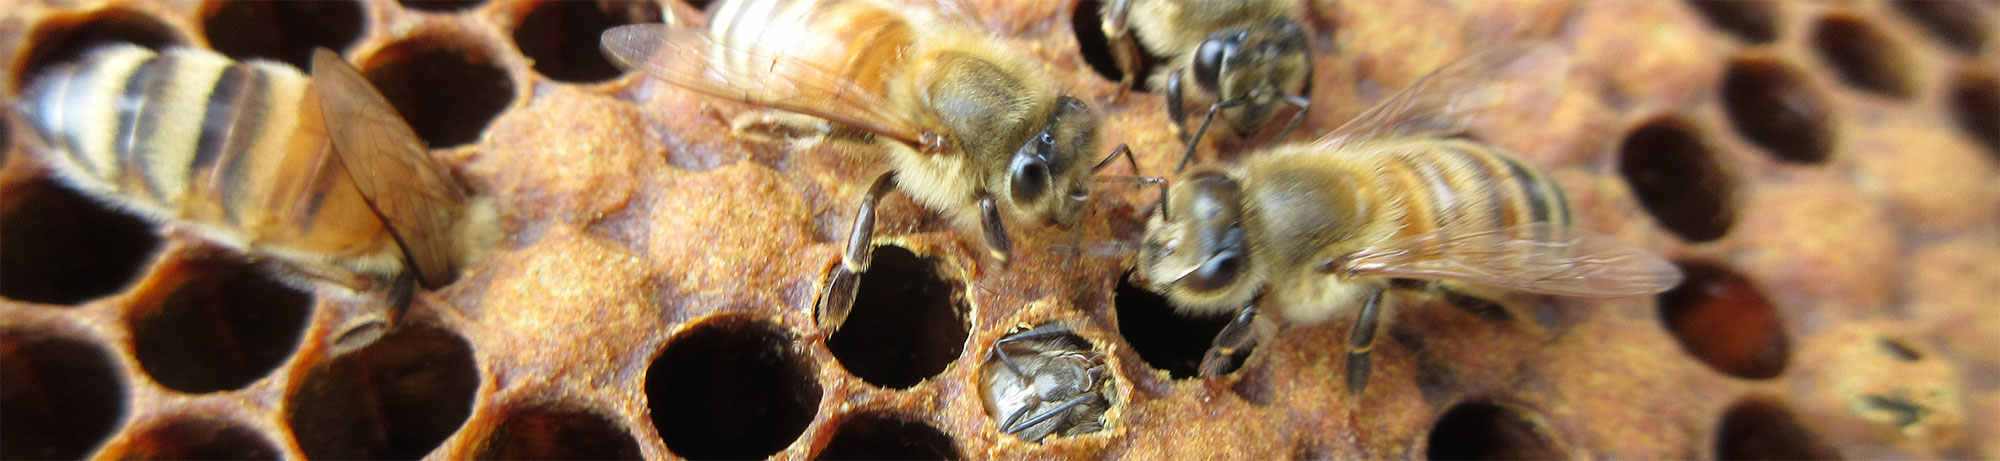 newly developed bee emerging from its larval cell